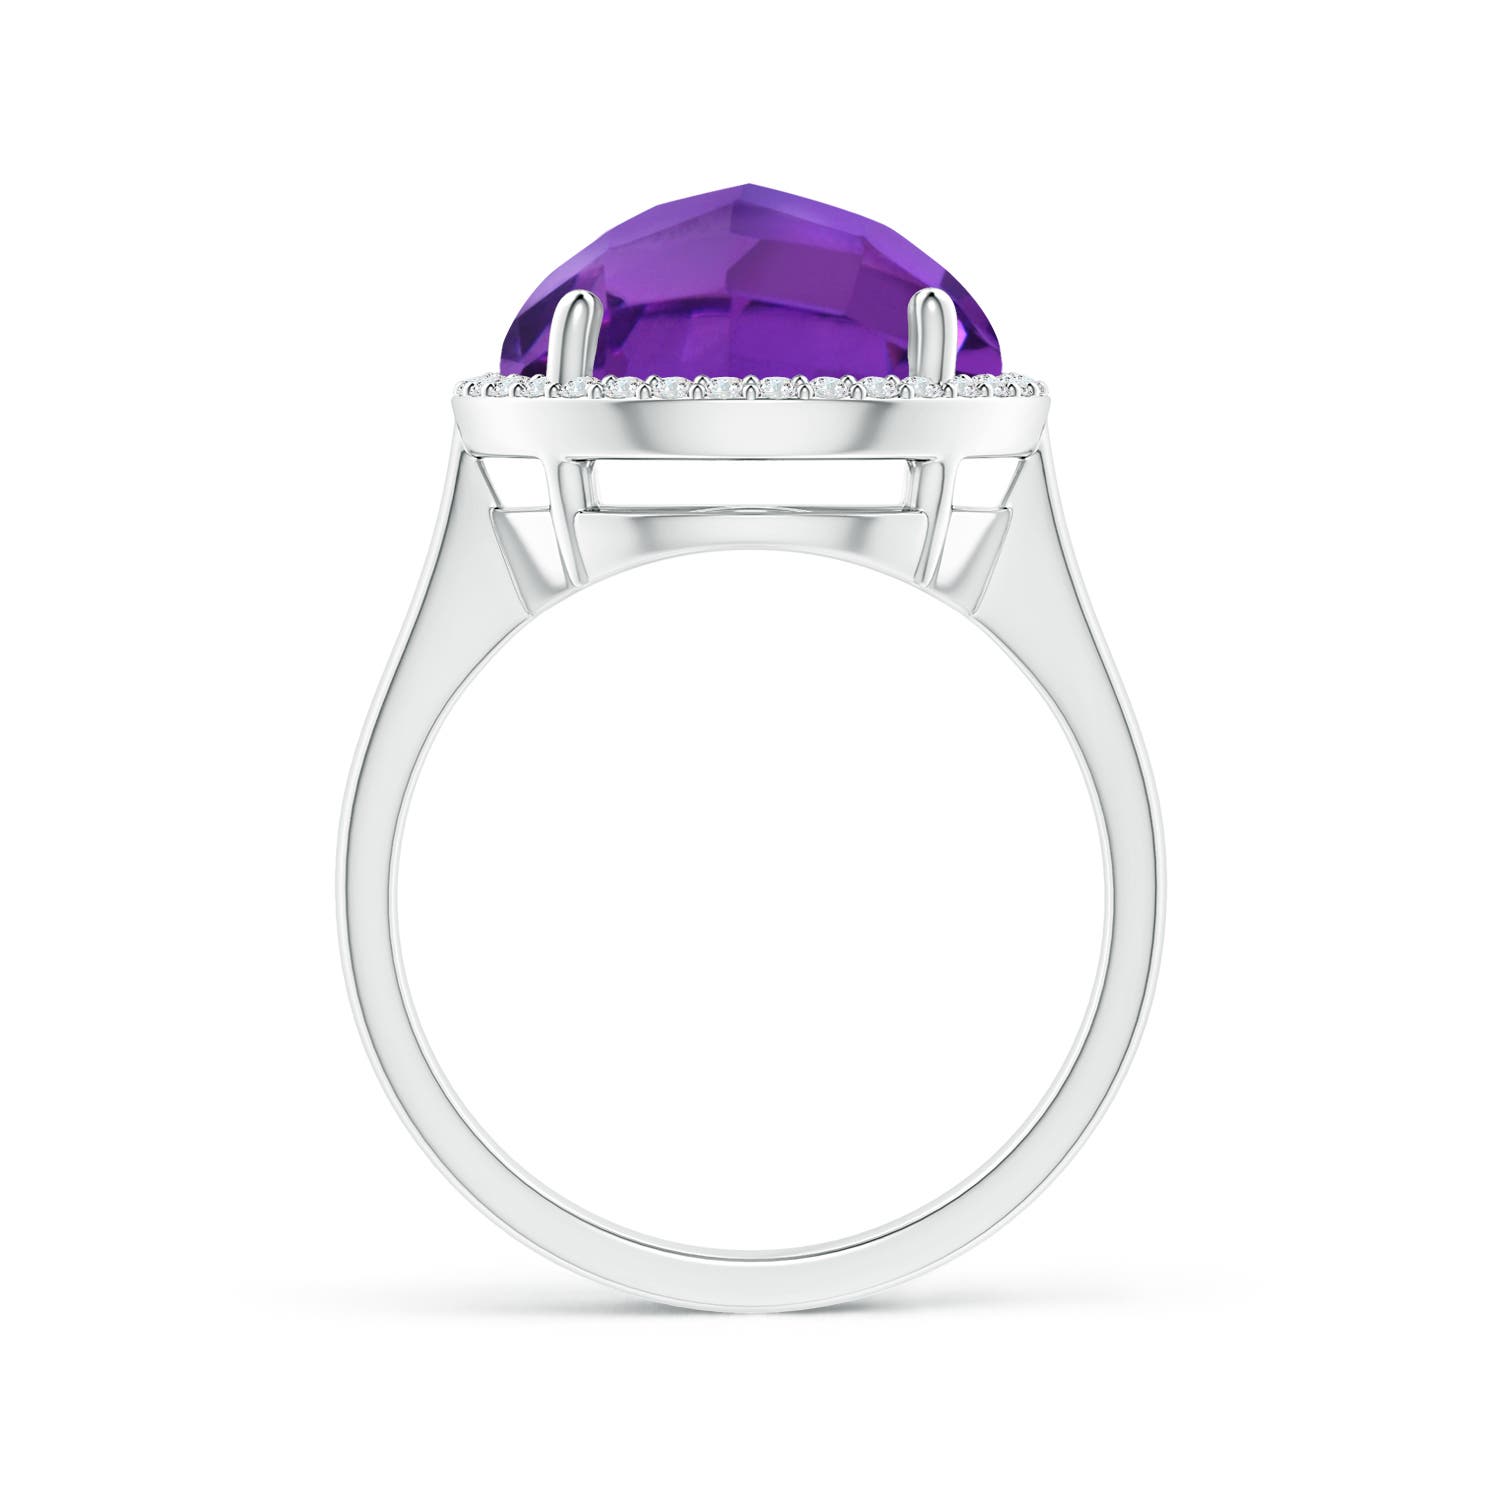 AAA - Amethyst / 5.7 CT / 14 KT White Gold